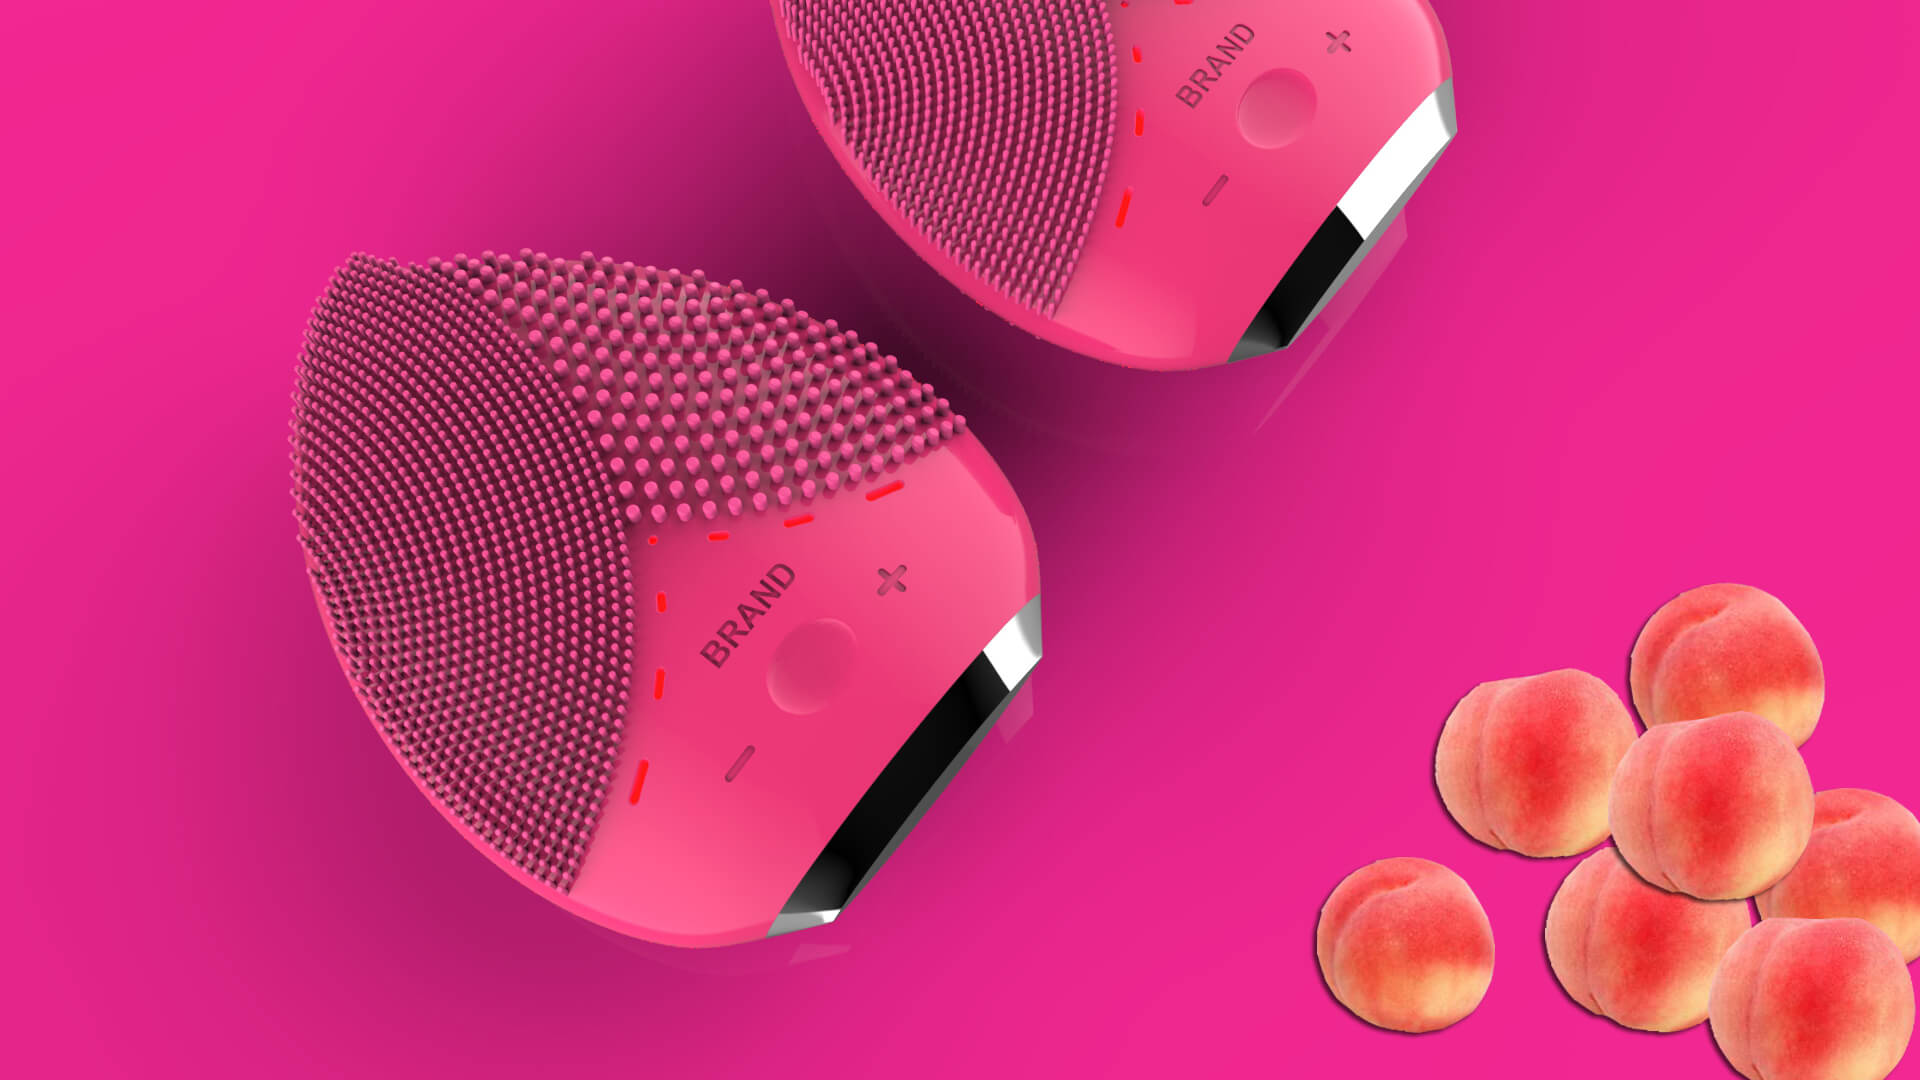 BEAUTY DEVICES DESIGN